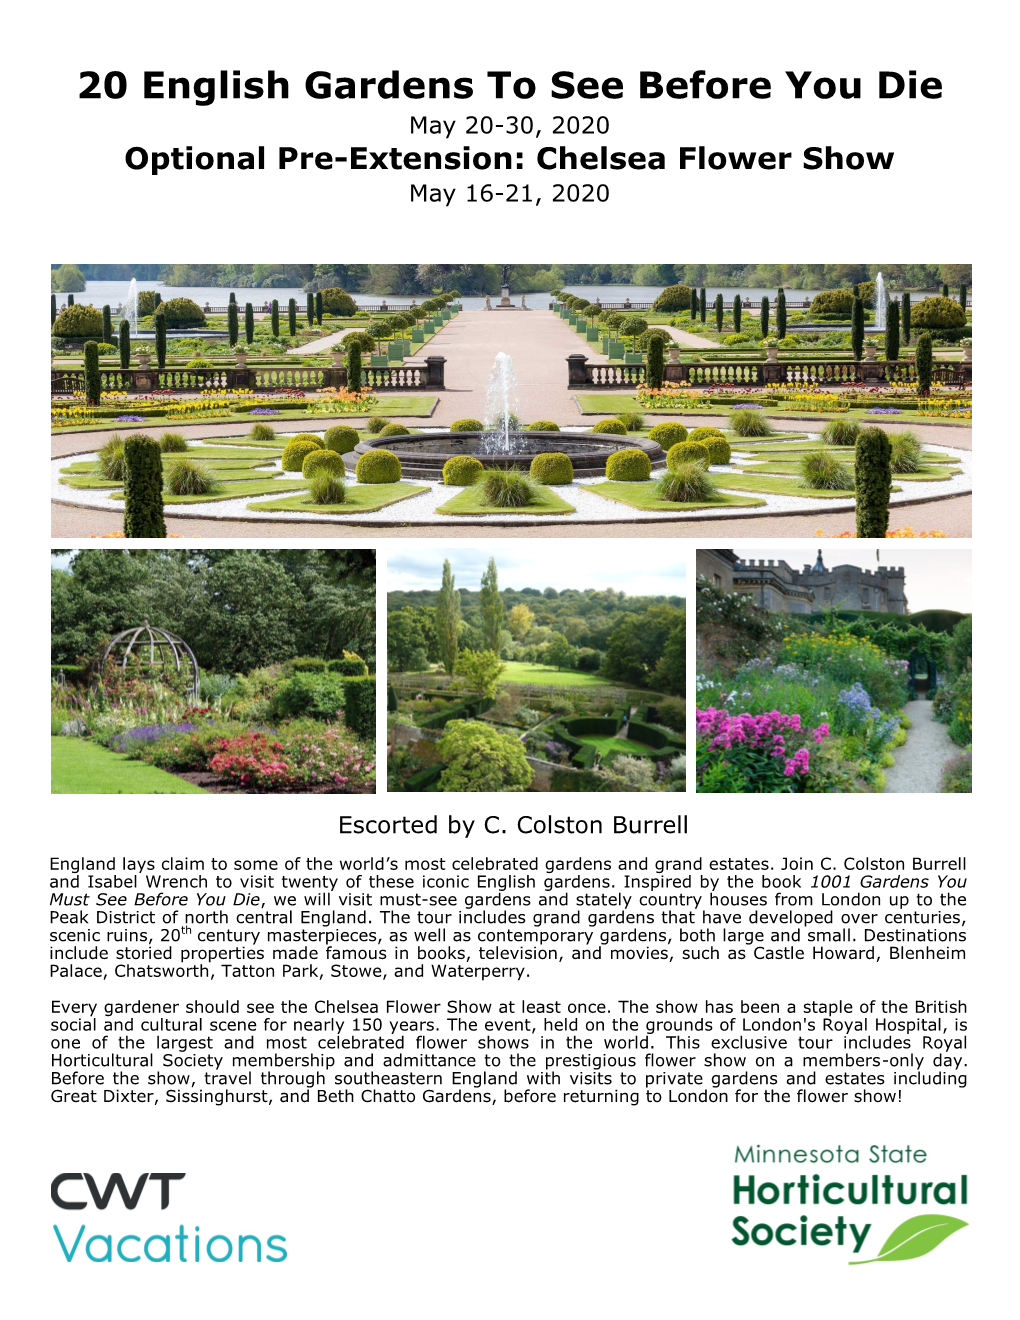 20 English Gardens to See Before You Die May 20-30, 2020 Optional Pre-Extension: Chelsea Flower Show May 16-21, 2020